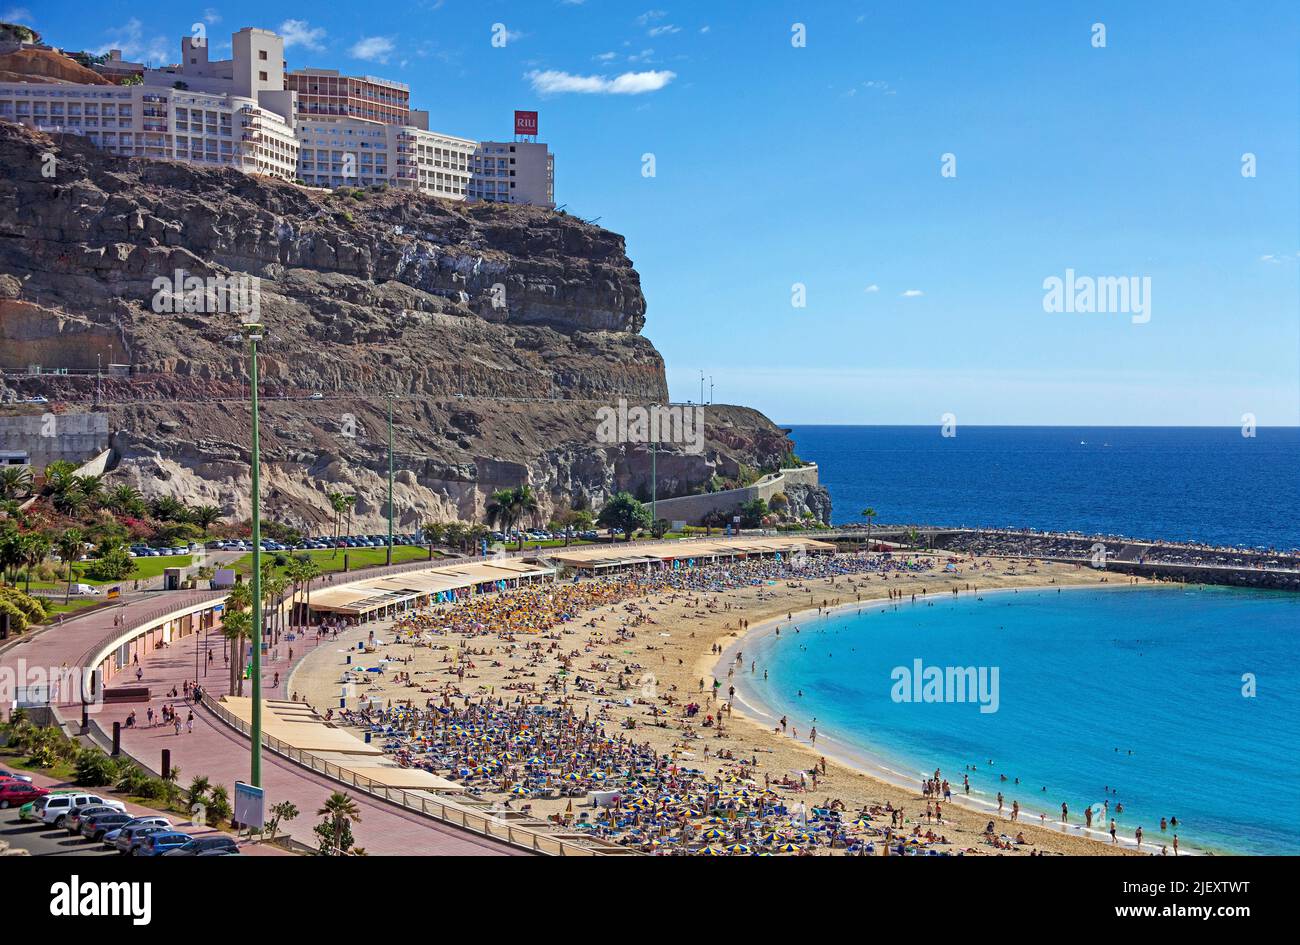 Holidaymakers on Playa de los Amadores, bathing beach close to Puerto Rico, Grand Canary, Canary islands, Spain, Europe, Atlantic ocean Stock Photo